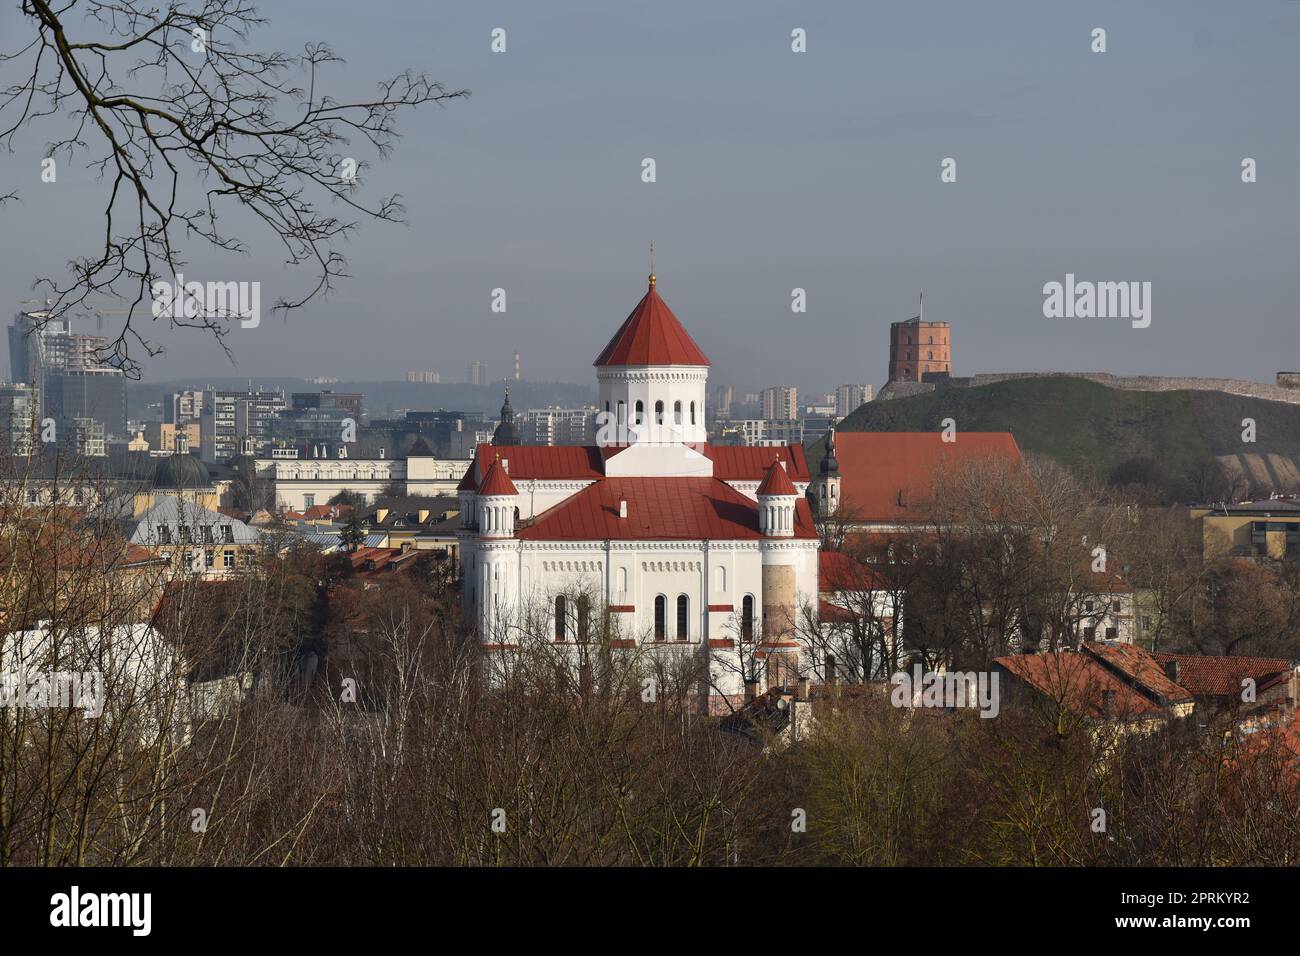 Vilnius, capital of Lithuania, View from the hill on the old city center Stock Photo